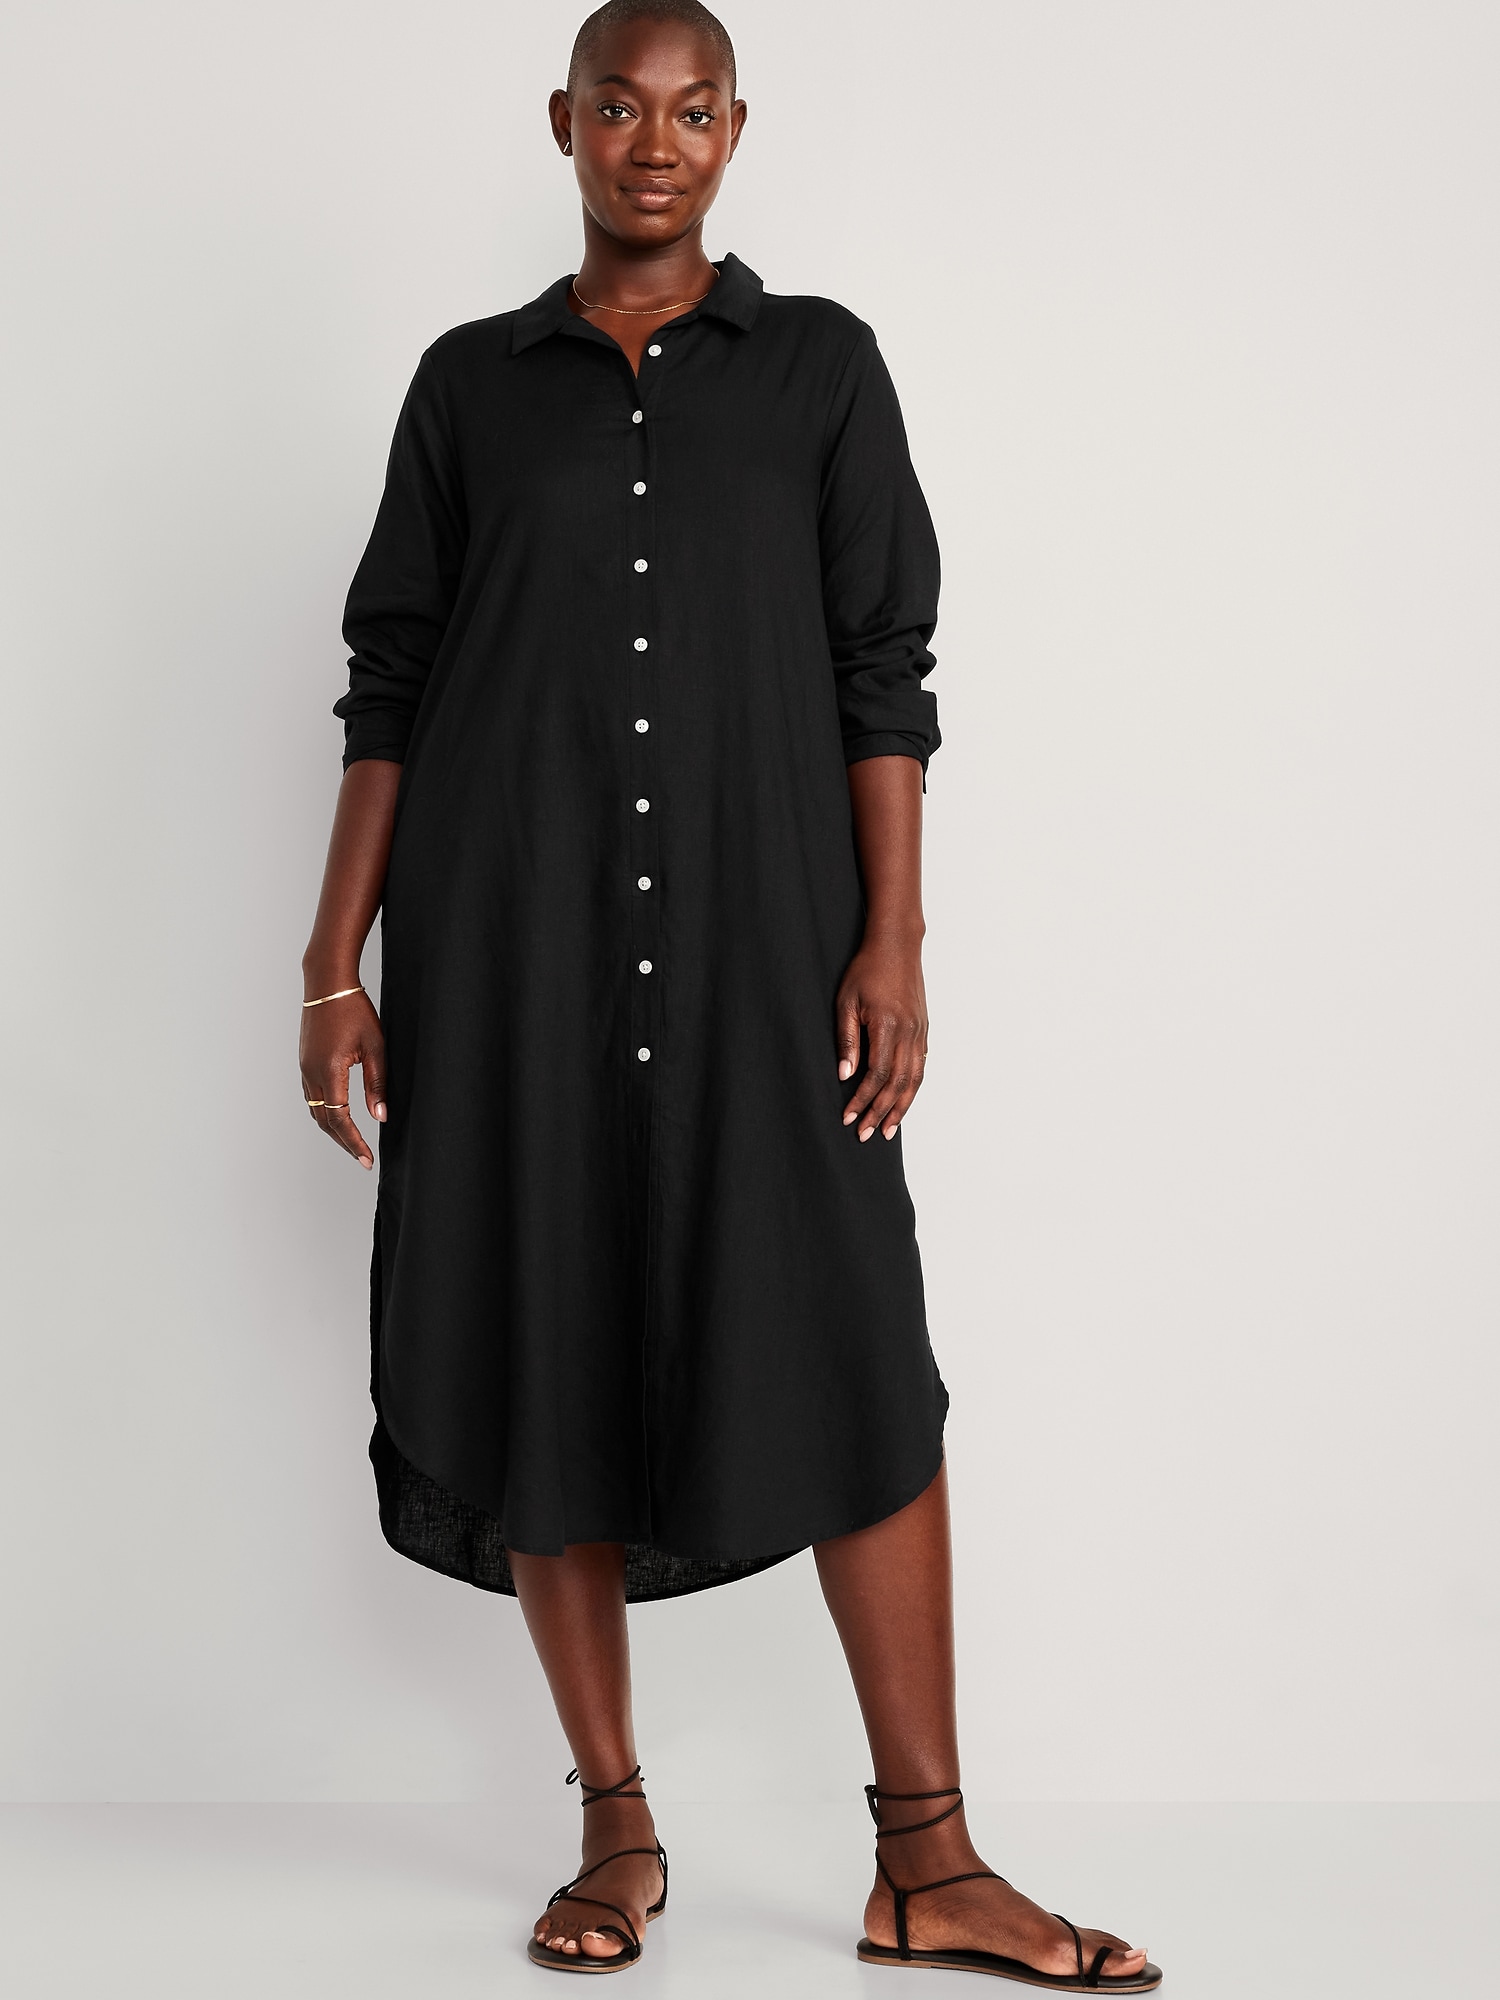 Shop Casual Dresses For Fall | White House Black Market